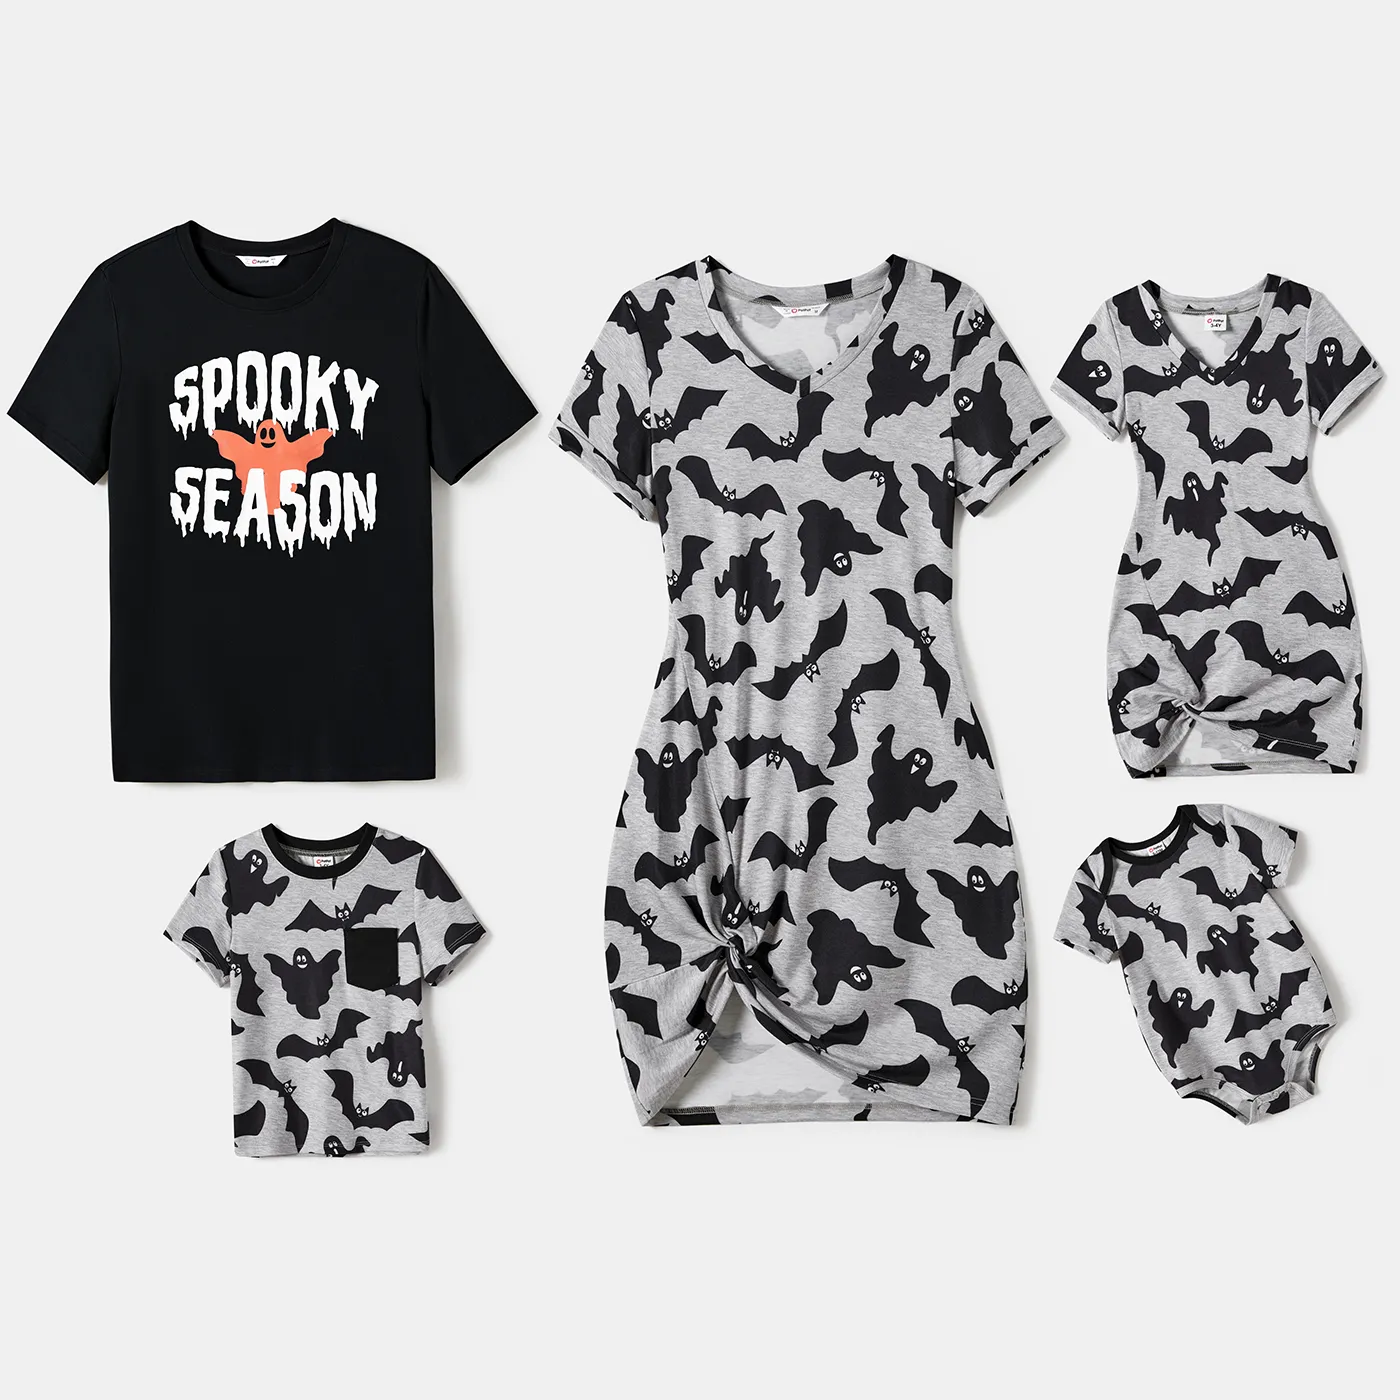 

Halloween Family Matching Bat Print Bodycon T-shirt Dresses and Letter Print Short Sleeve Tops Sets